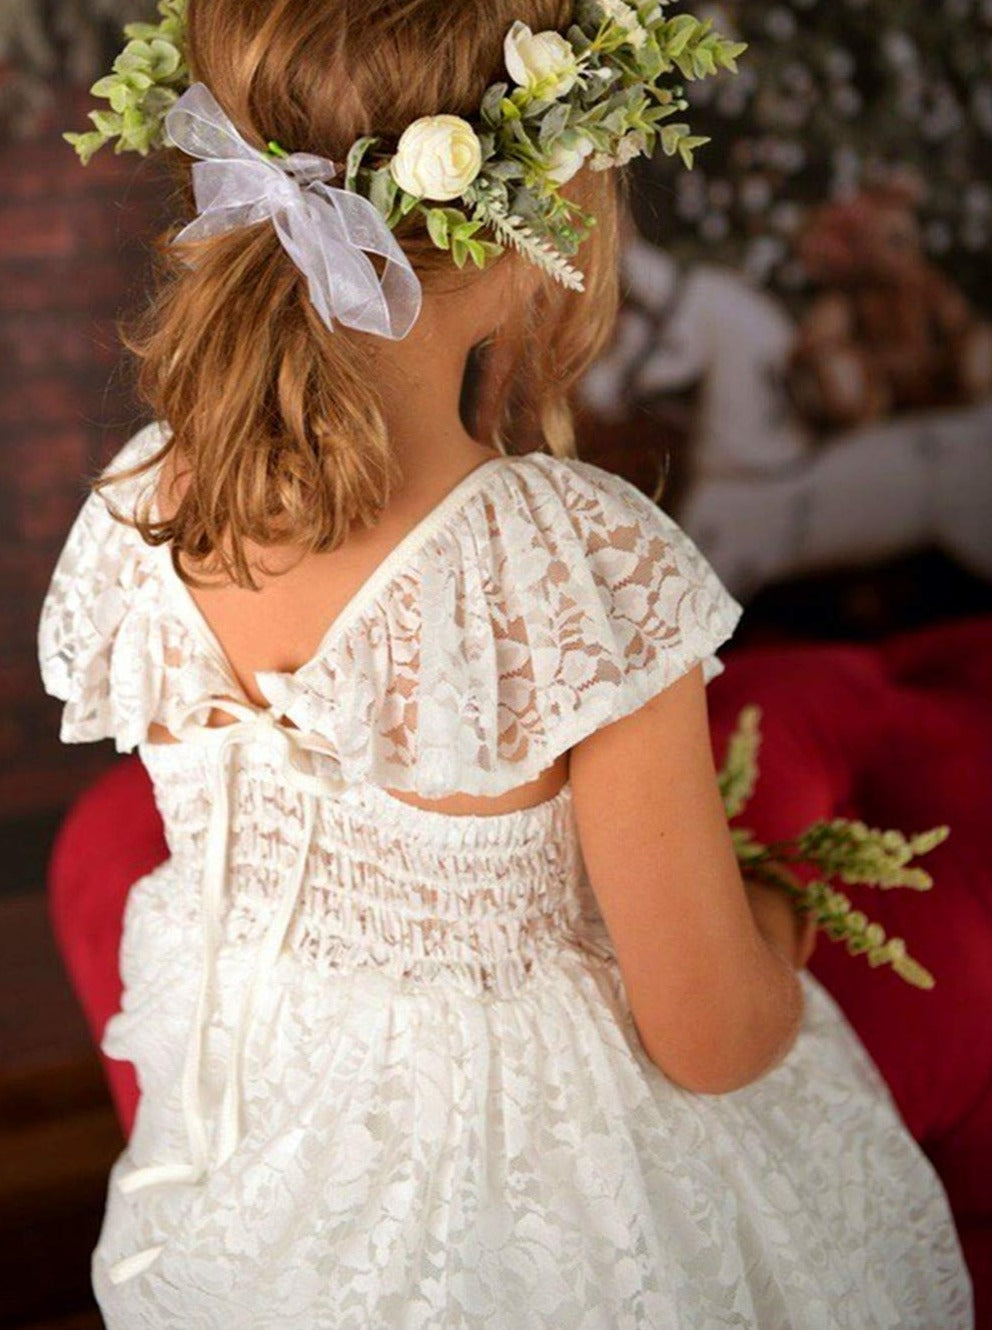 2Bunnies Flower Girl Dress Paisley All Lace Butterfly Sleeve Maxi (White) - 2BUNNIES